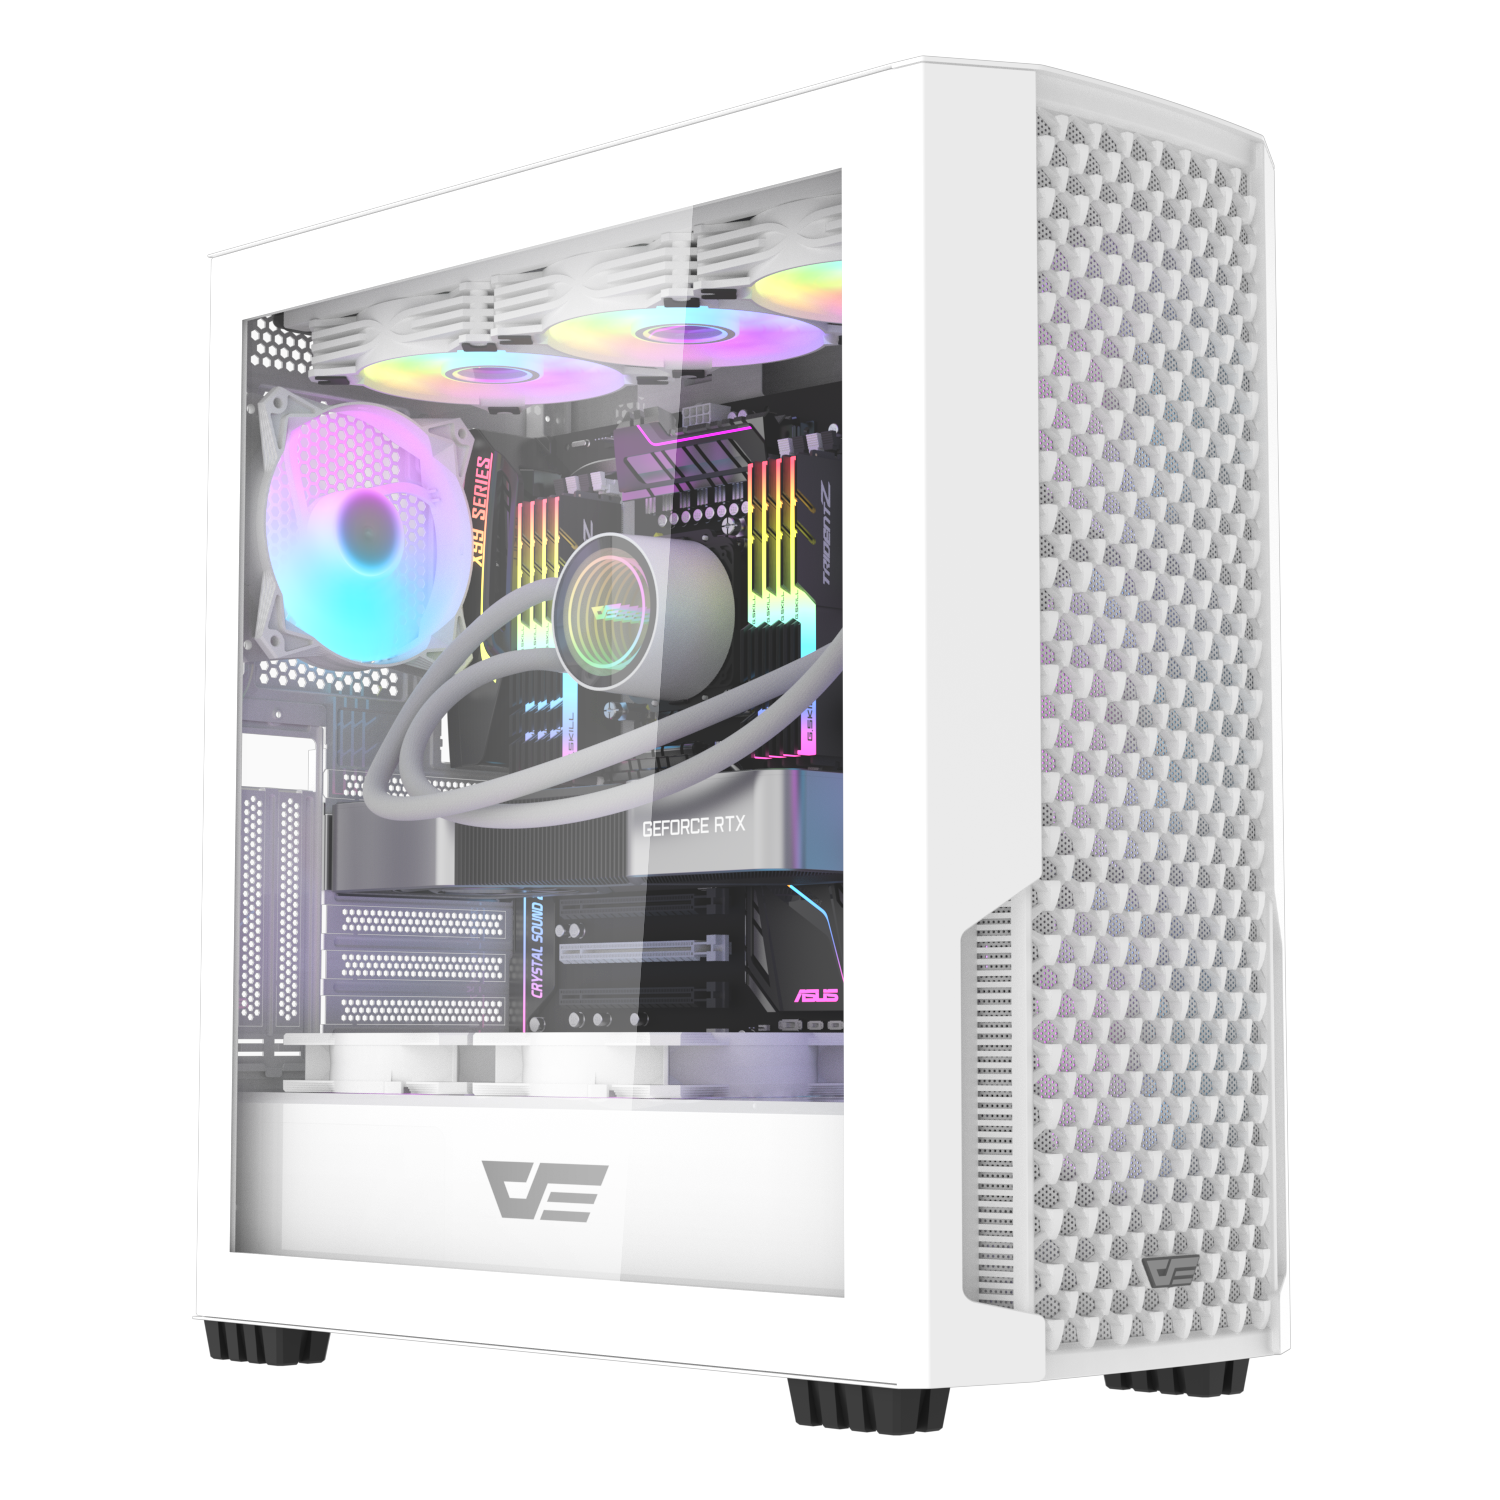 Darkflash DF 2100 E-ATX Mid tower Gaming cabinet | USB 3.0, Up to 9 PCI Slots, Mesh Design front panel | Tempered Glass Side Panel PC Case- Black